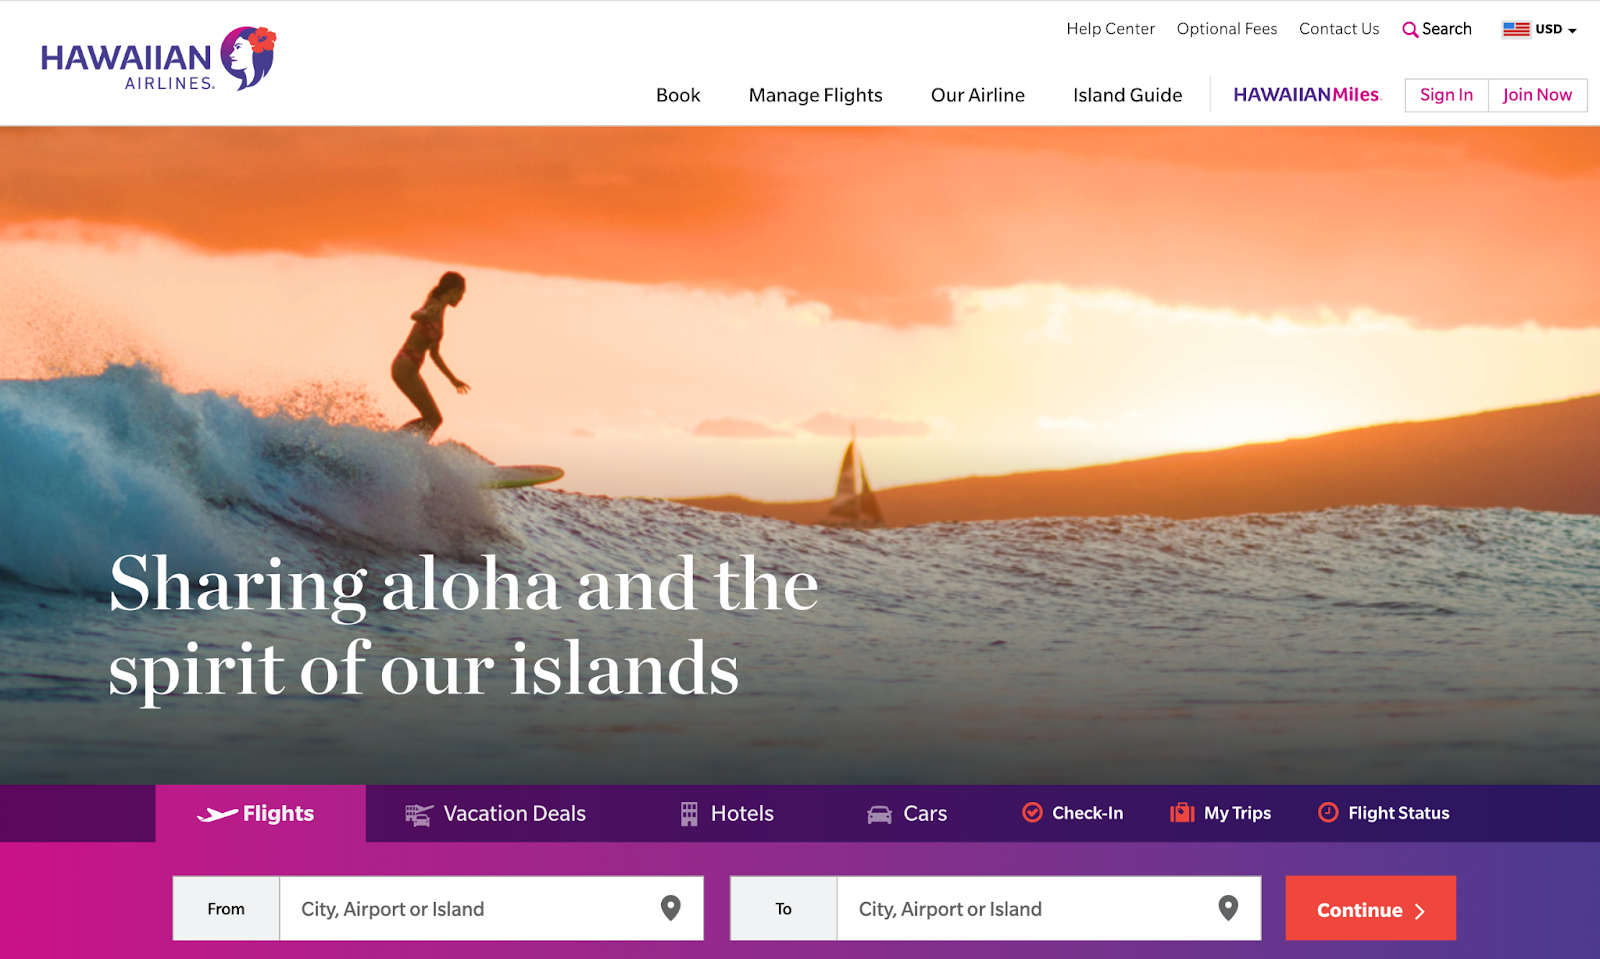 Hawaiian Airlines flight booking page